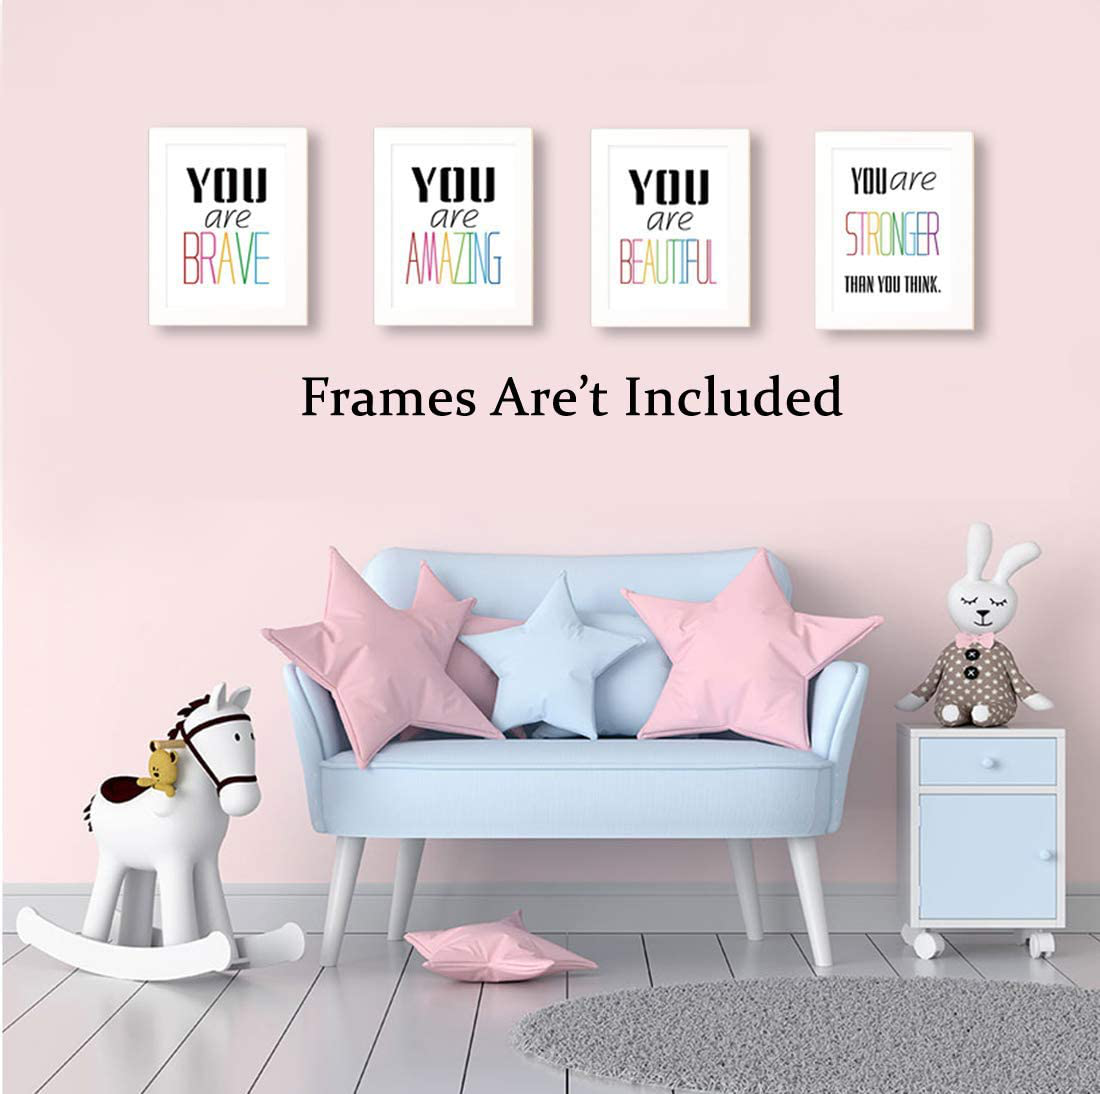 HPNIUB Typography Watercolor Words Inspirational Quote&Saying Modern Art Print Set of 9 (8”X10” Painting，Motivational Phrase Wall Art Poster for Nursery or Kids Room Home Decor，Not Include Frame